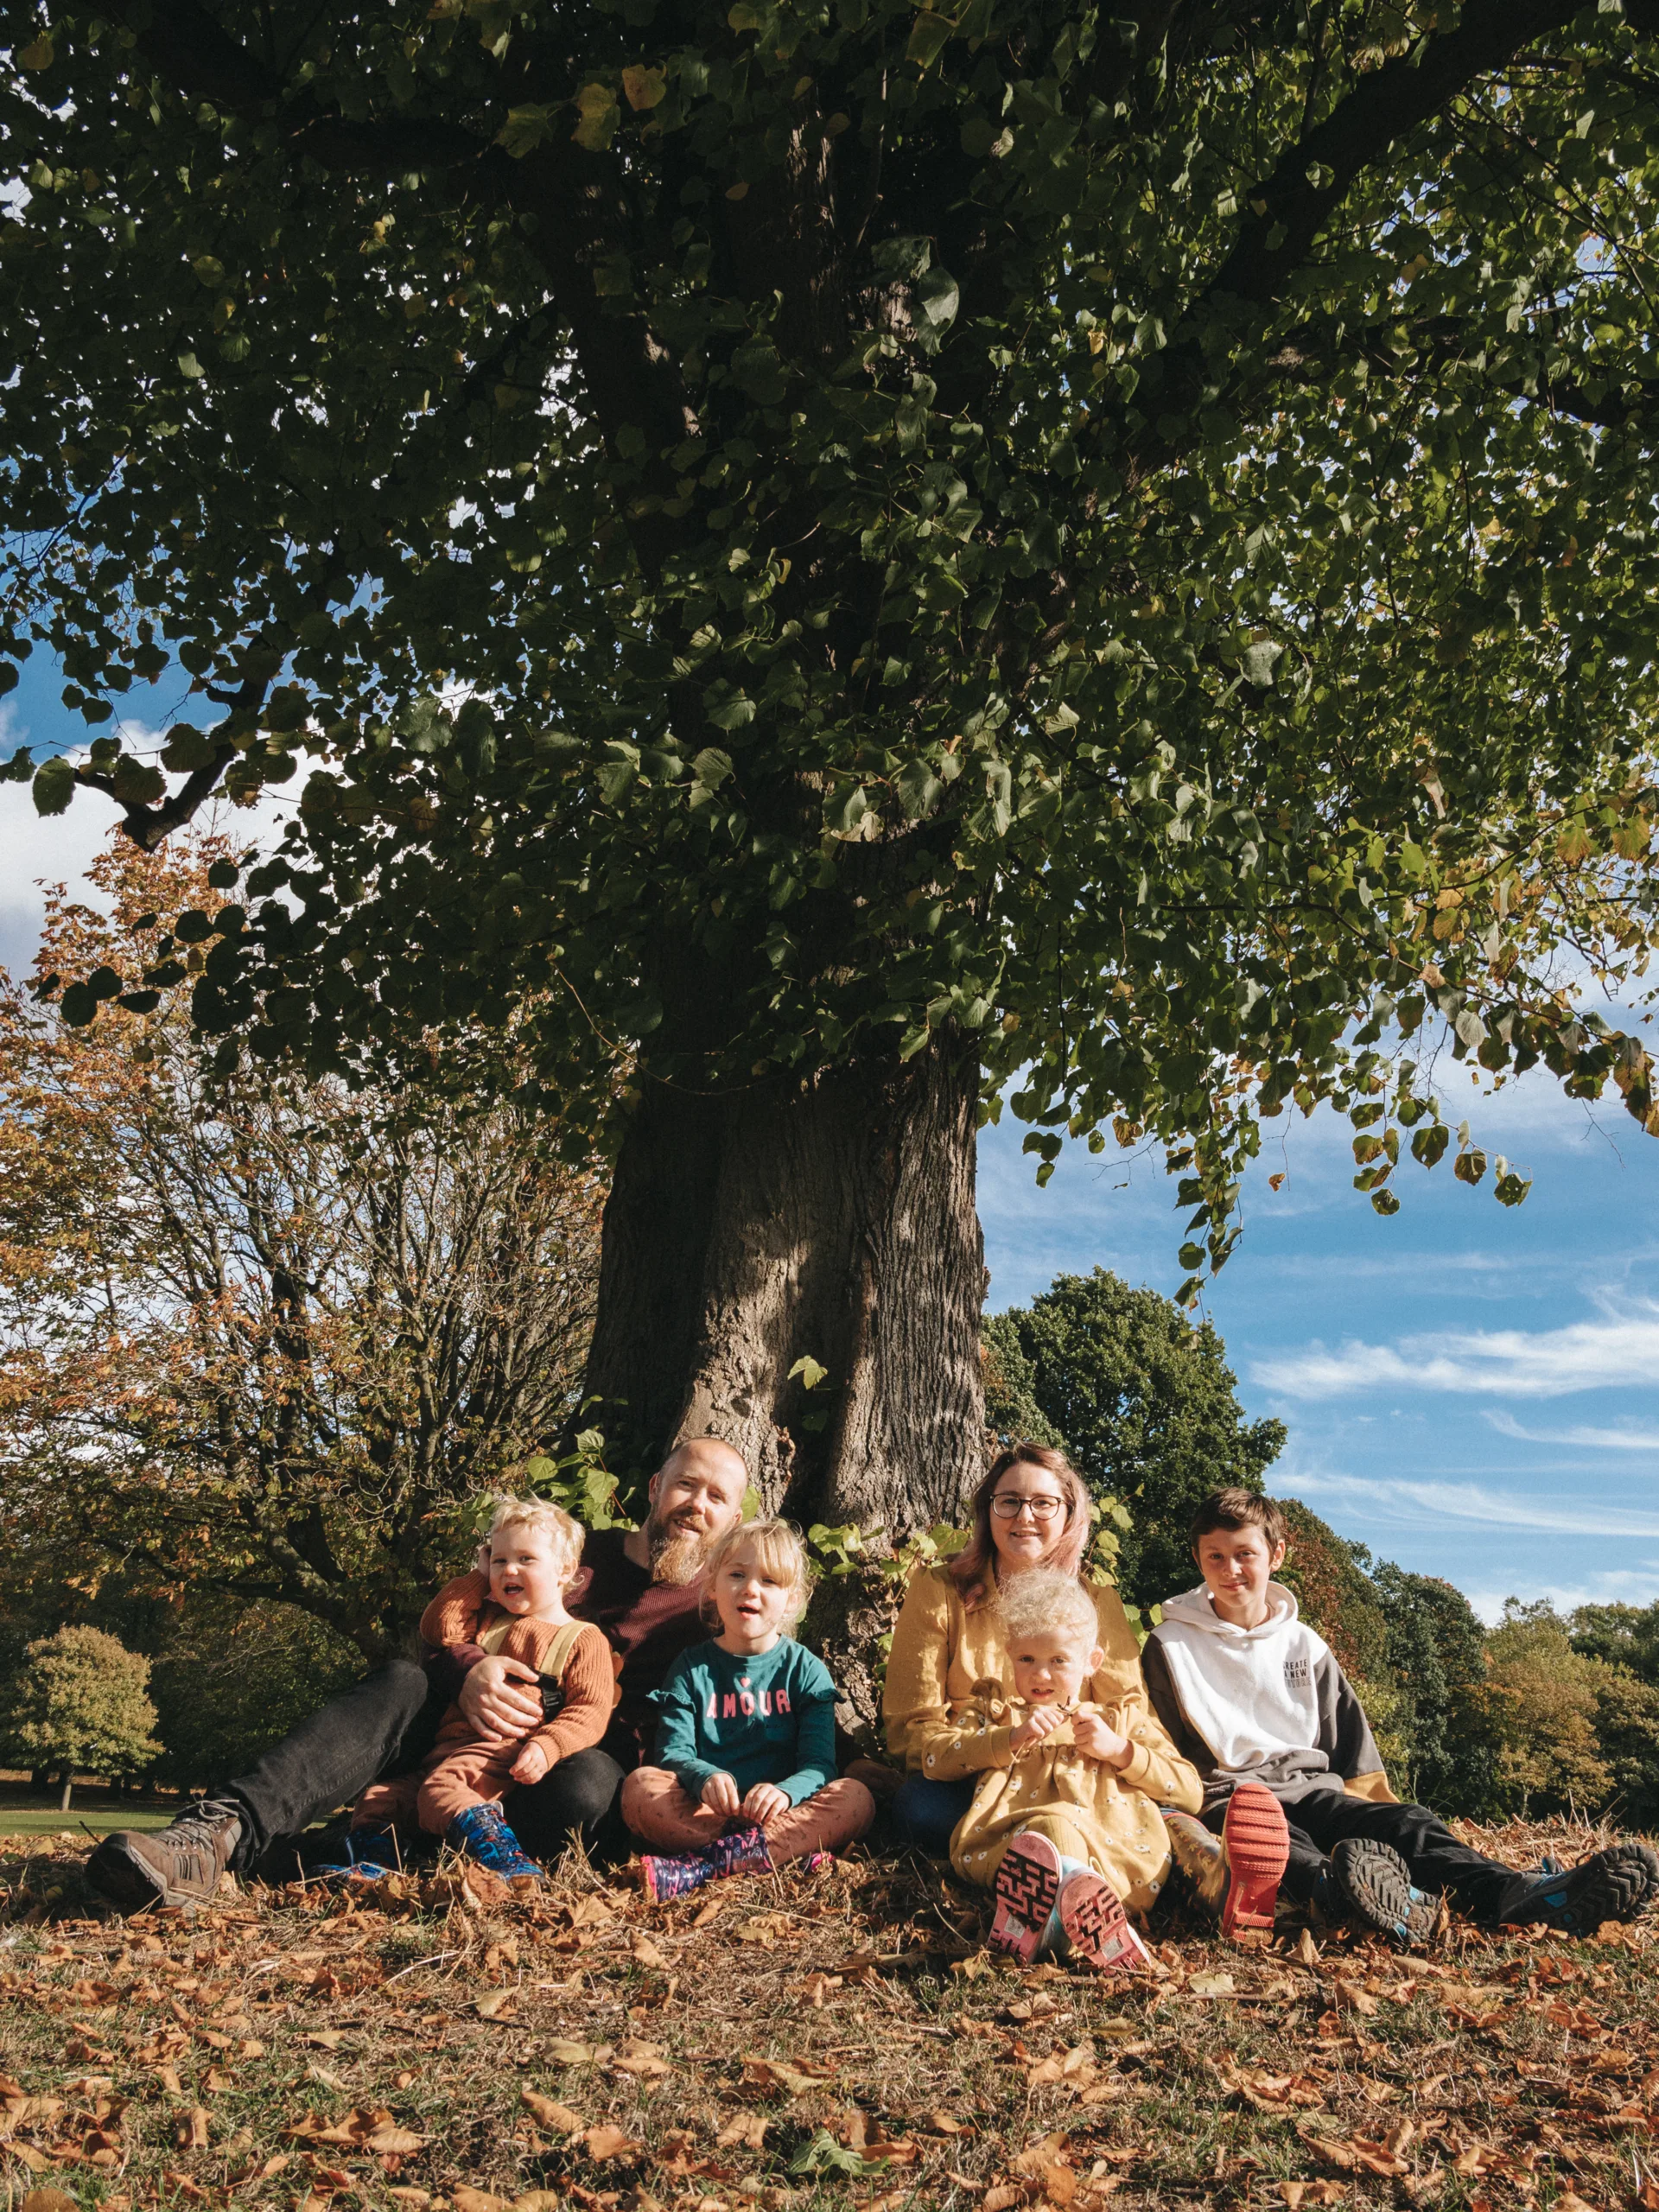 A family enjoys a picnic under a tree in a park.